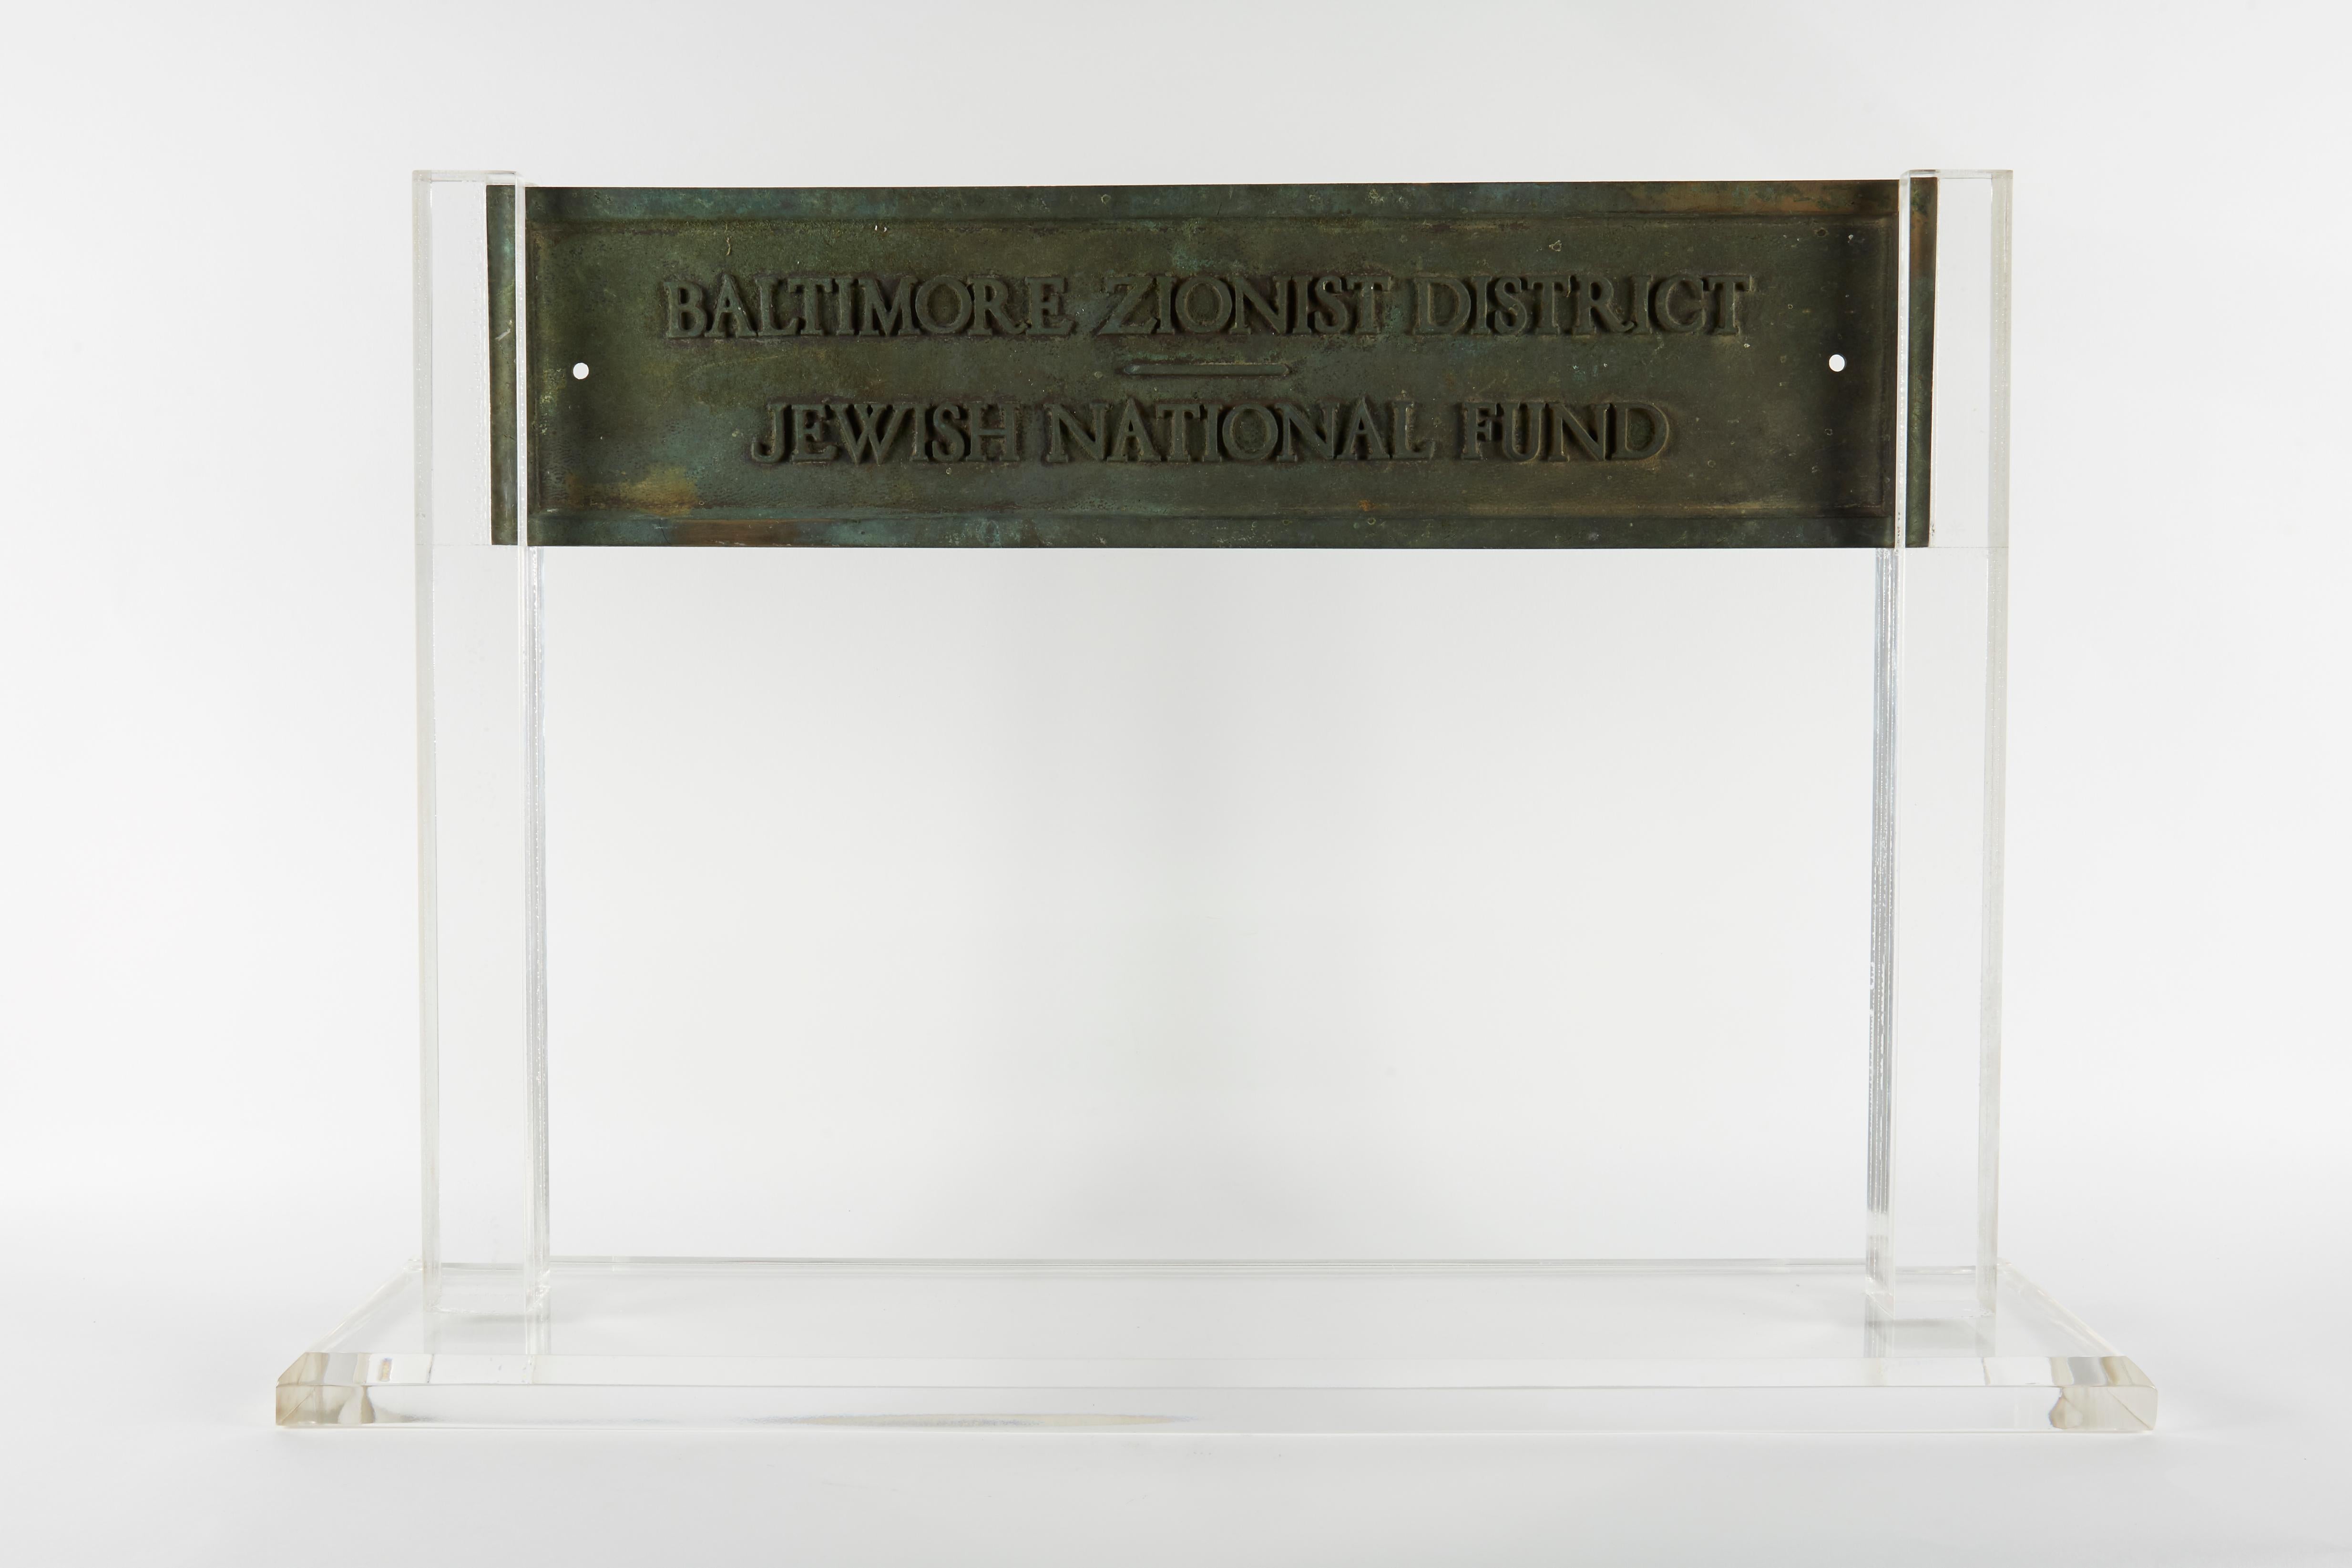 Early 20th century, heavy and massive bronze sign plaque for the Baltimore Zionist District 
National Jewish Fund.
Cast in USA, circa 1900.